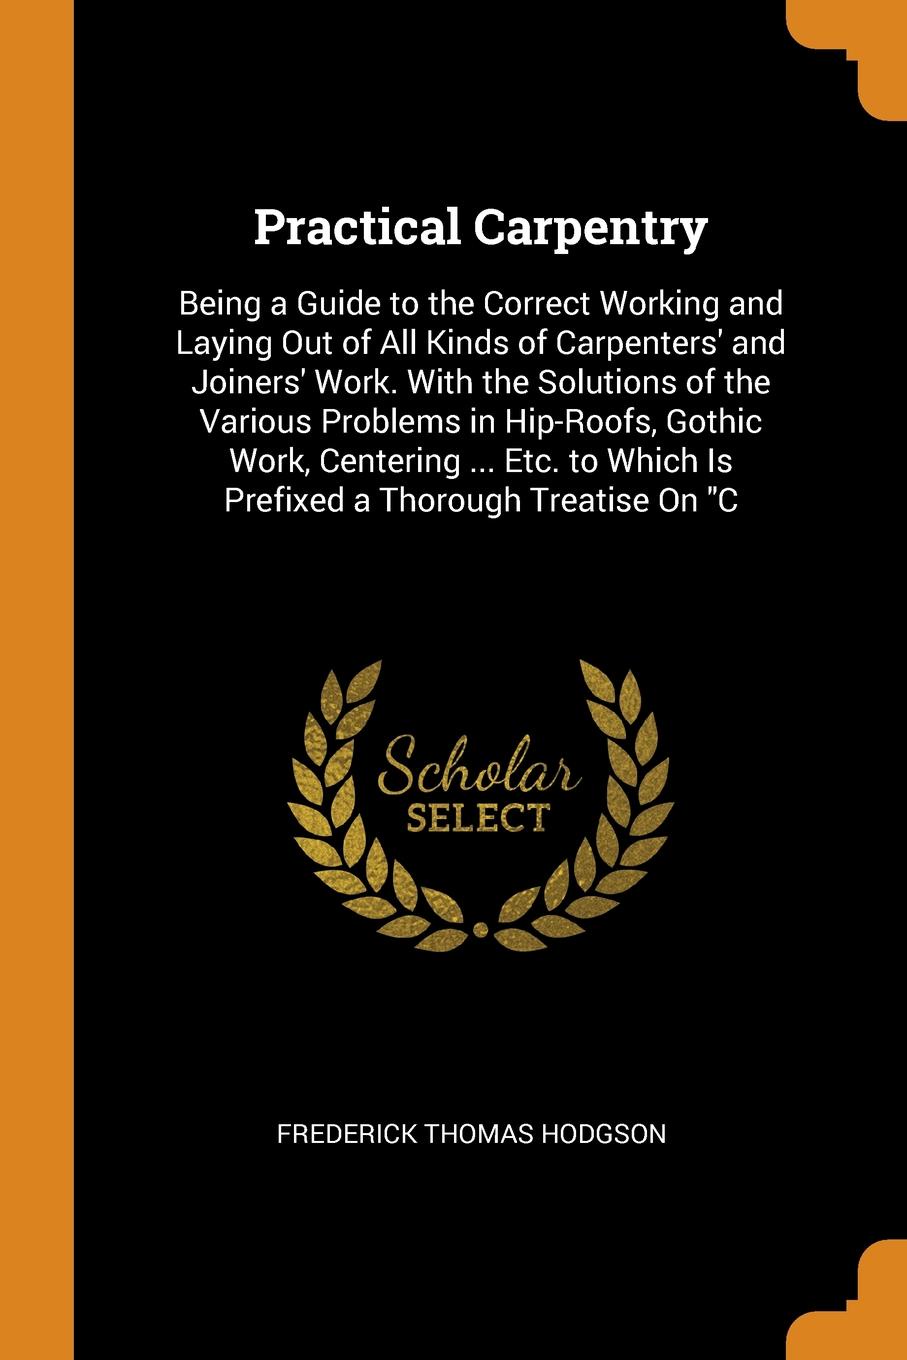 Practical Carpentry. Being a Guide to the Correct Working and Laying Out of All Kinds of Carpenters` and Joiners` Work. With the Solutions of the Various Problems in Hip-Roofs, Gothic Work, Centering ... Etc. to Which Is Prefixed a Thorough Treati...